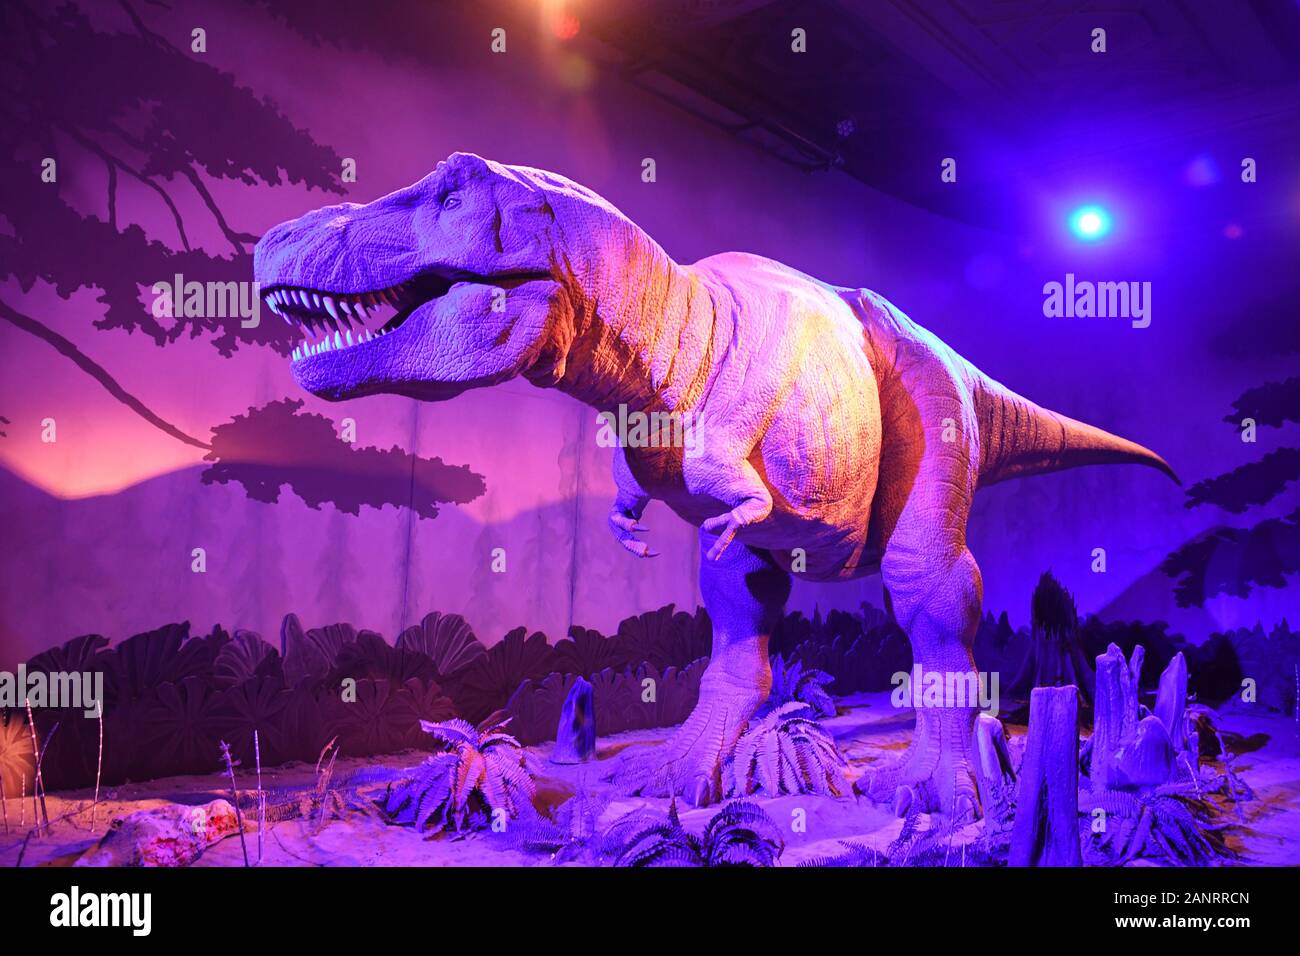 A moving, animatronic T-Rex in the The Dinosaur Gallery at the Natural History Museum, London, England, UK Stock Photo